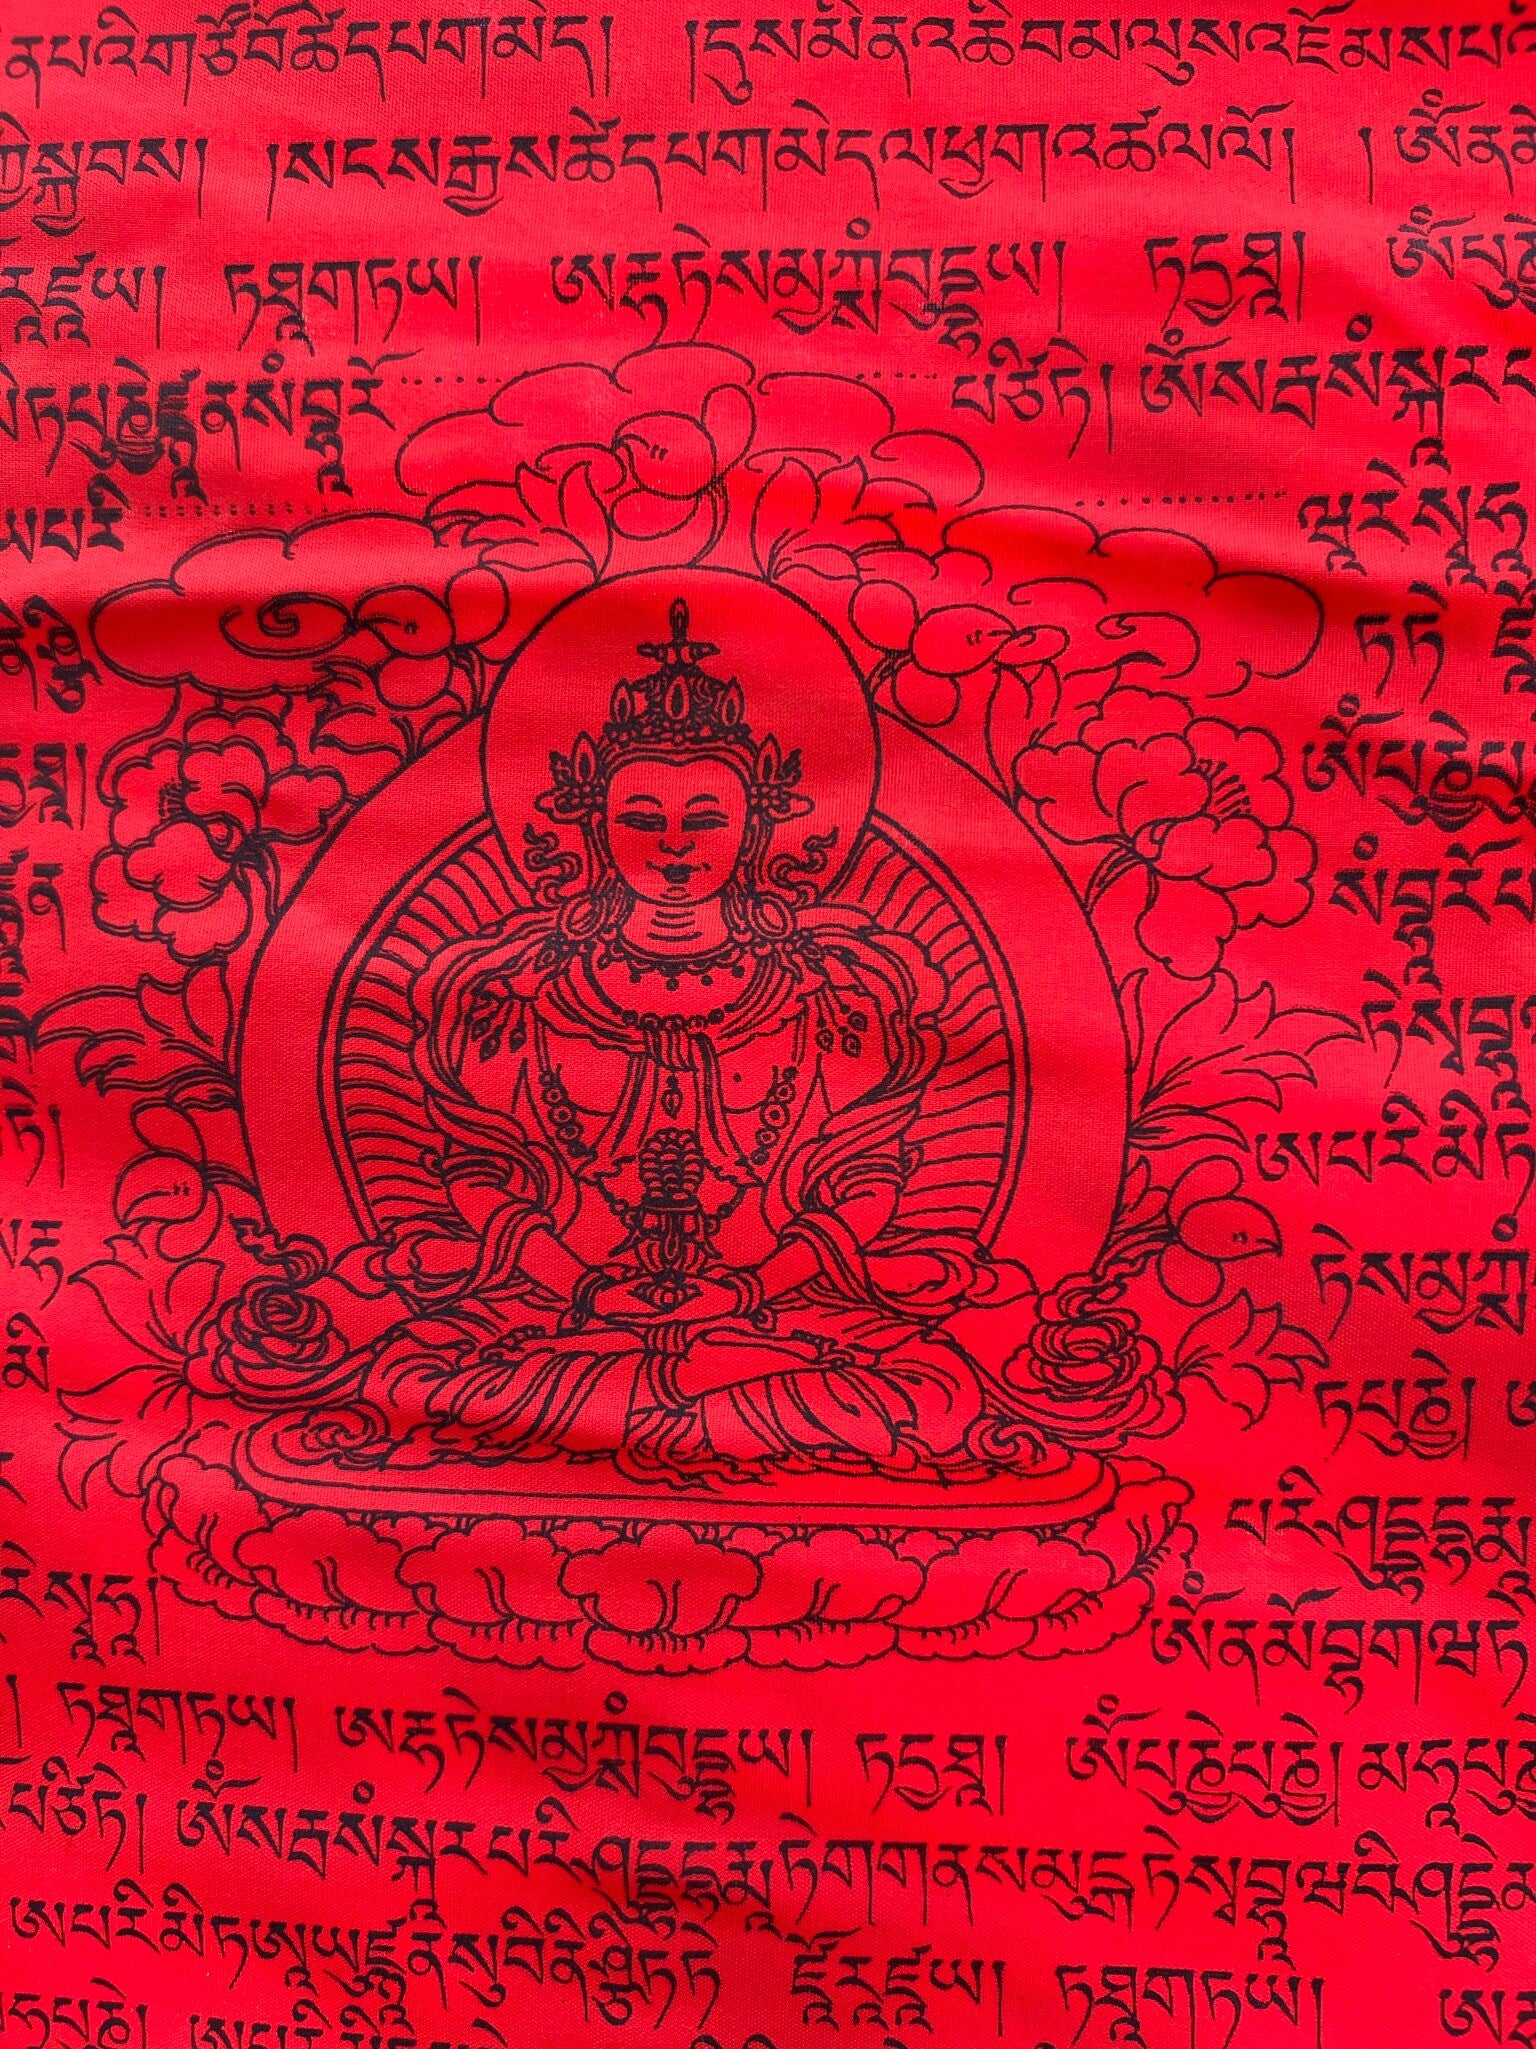 A close up of single flag from a 25 flag strand of vibrant red Amitayus prayer flags hanging outside. Each of the flags are 13&quot;x13&quot;. The detail reveals the Tibetan prayers and the image of Buddha Amitayus.